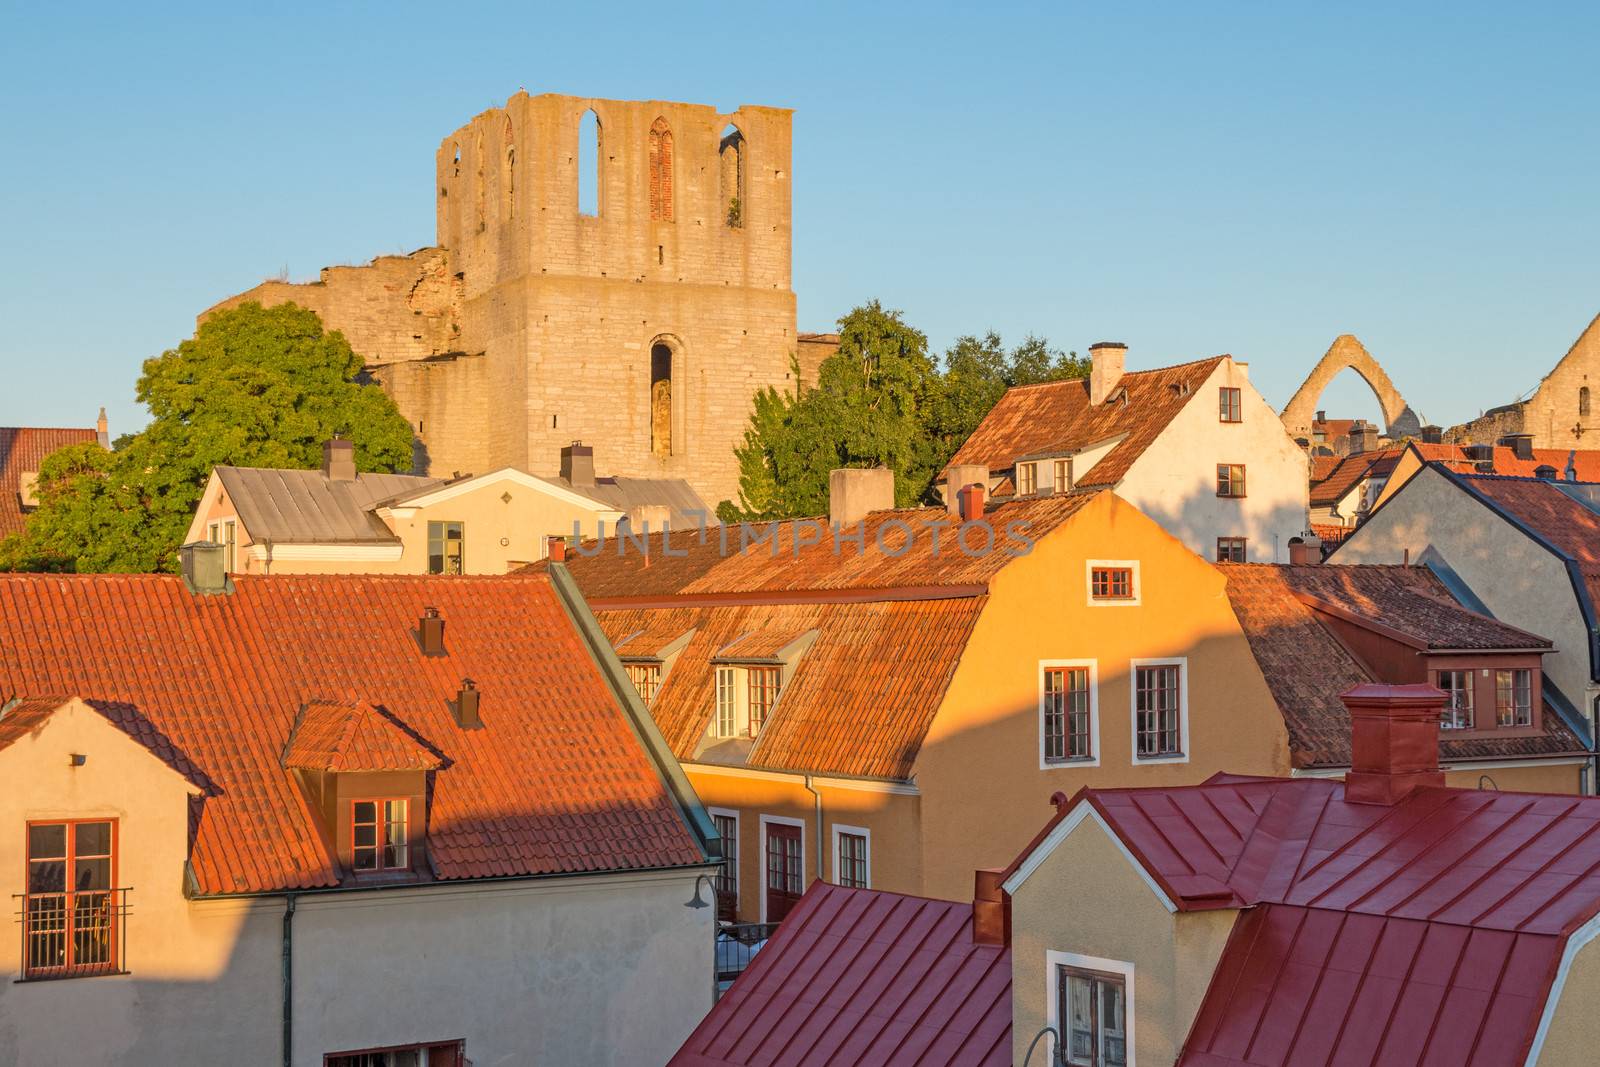 Rooftops and a medieval fortress in Visby, capital of Gotland, Sweden.